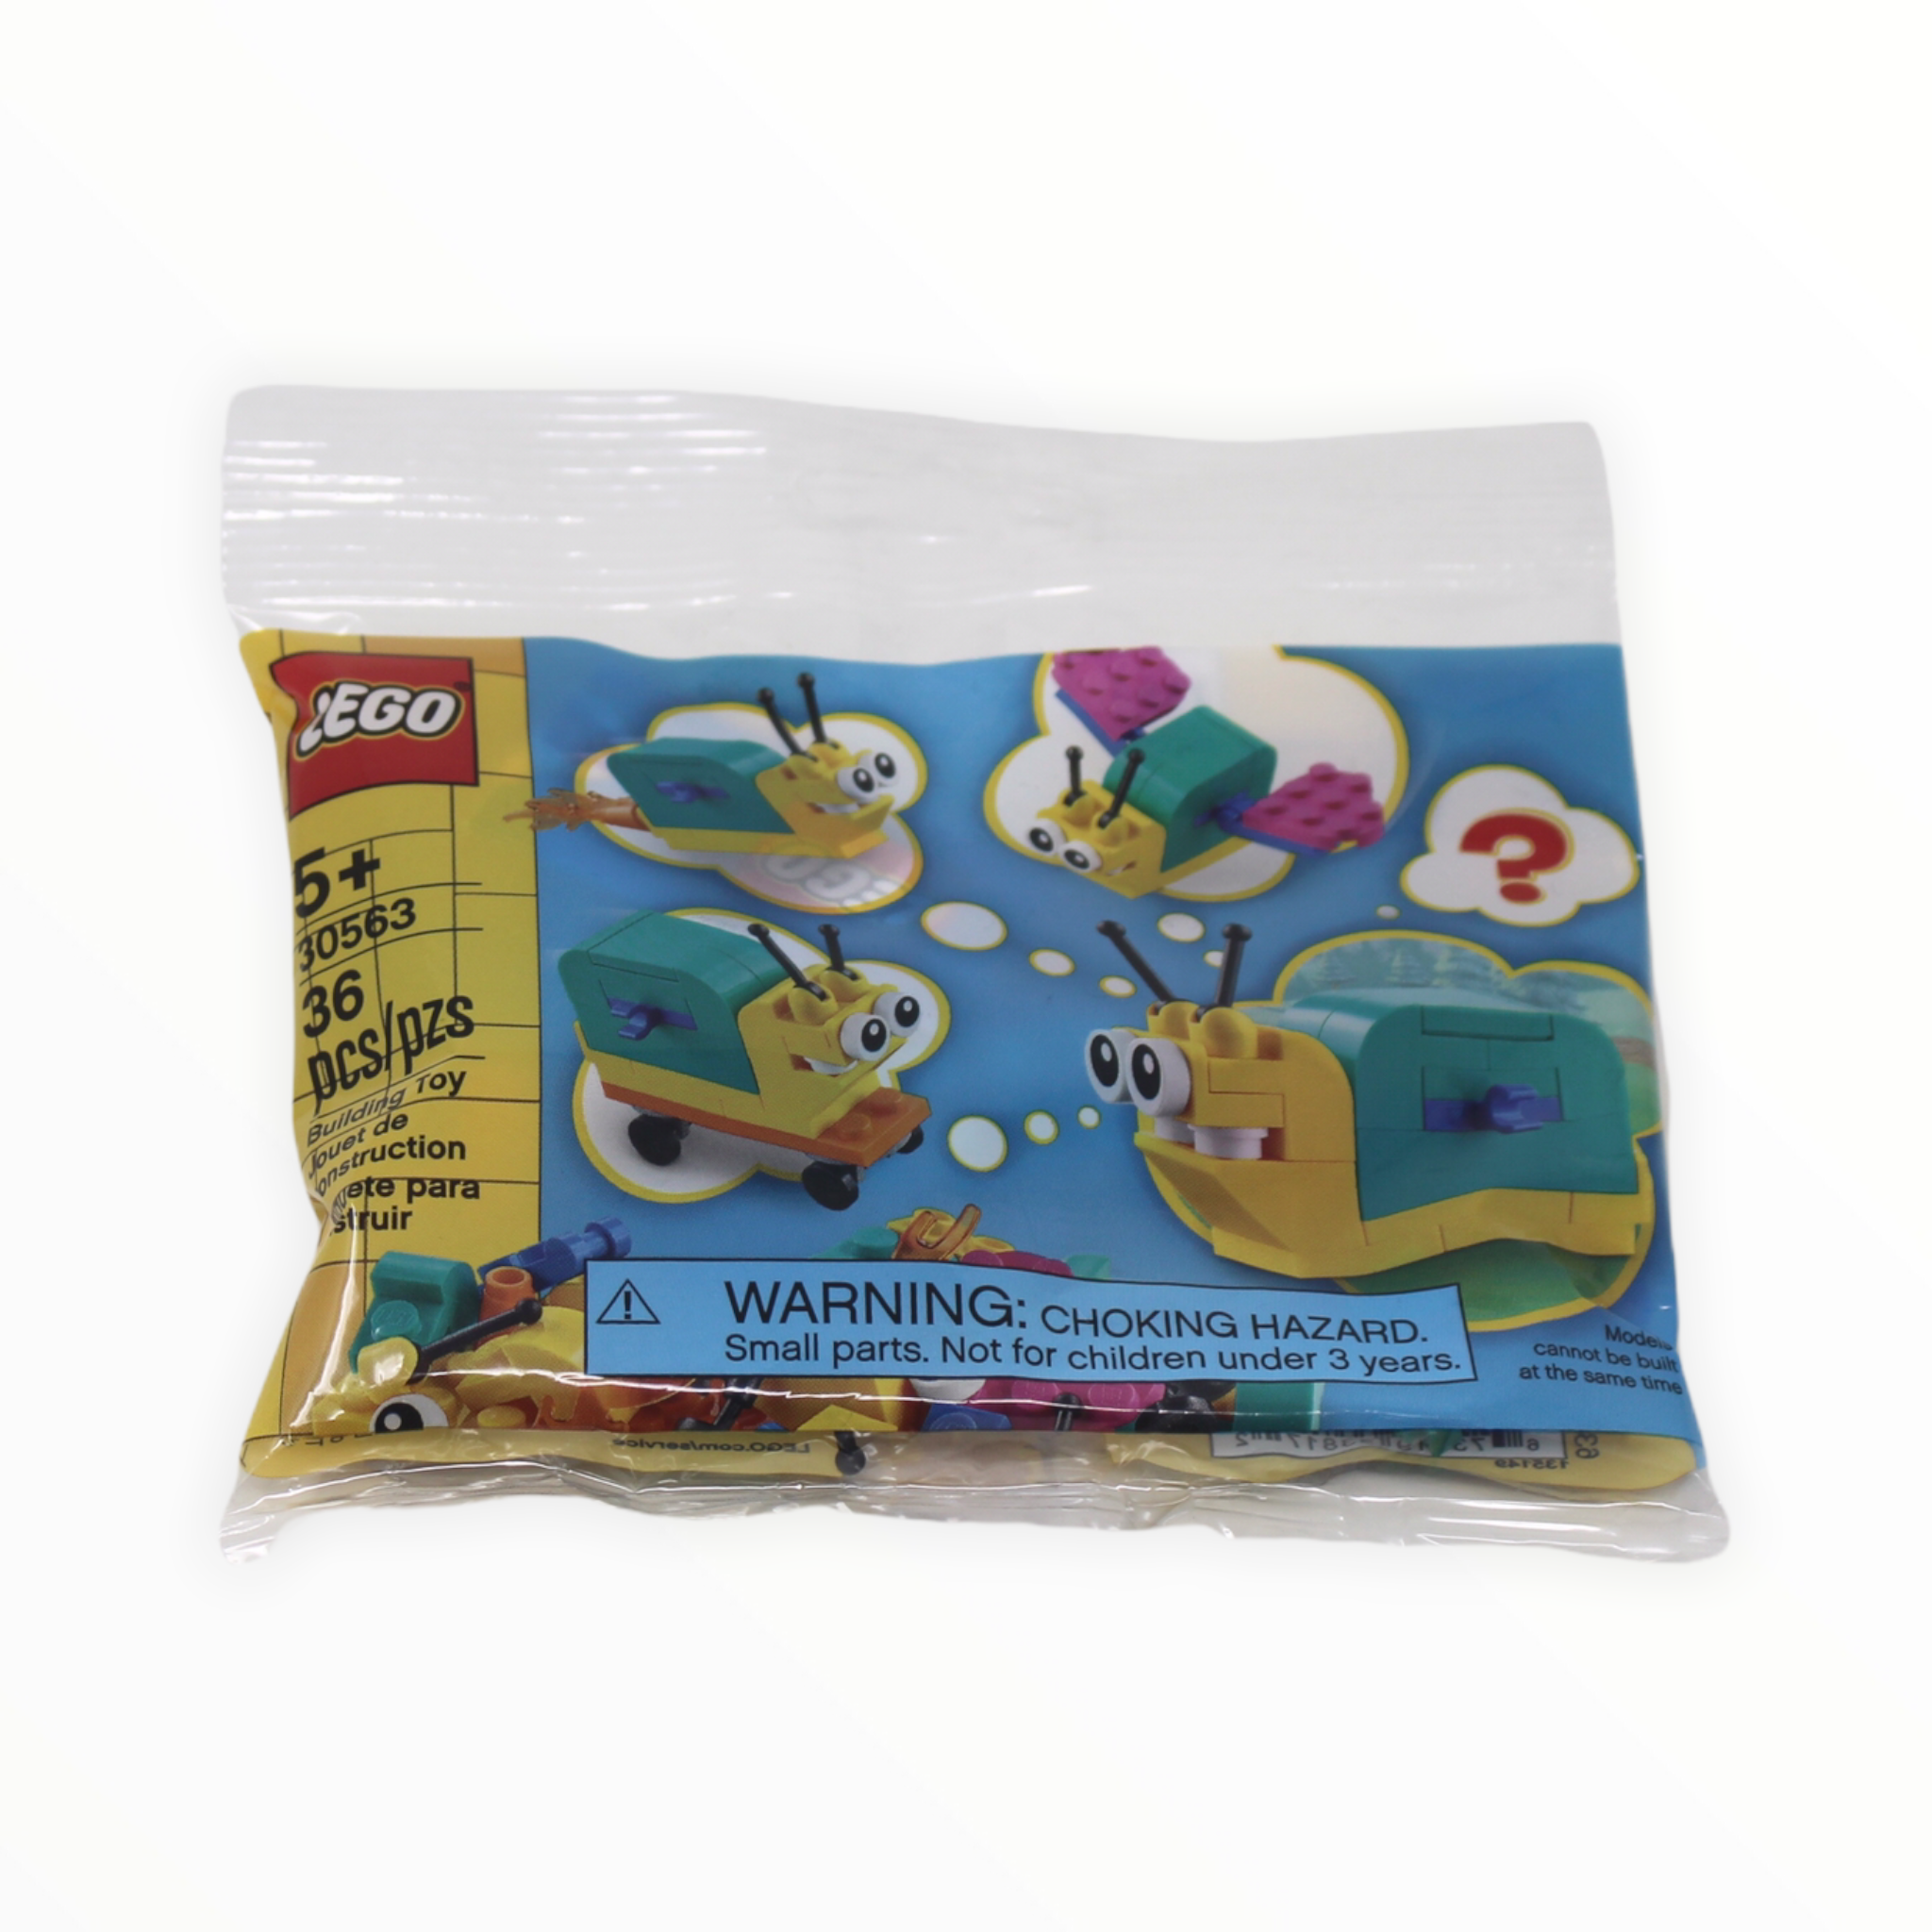 Polybag 30563 LEGO Build your own Snail